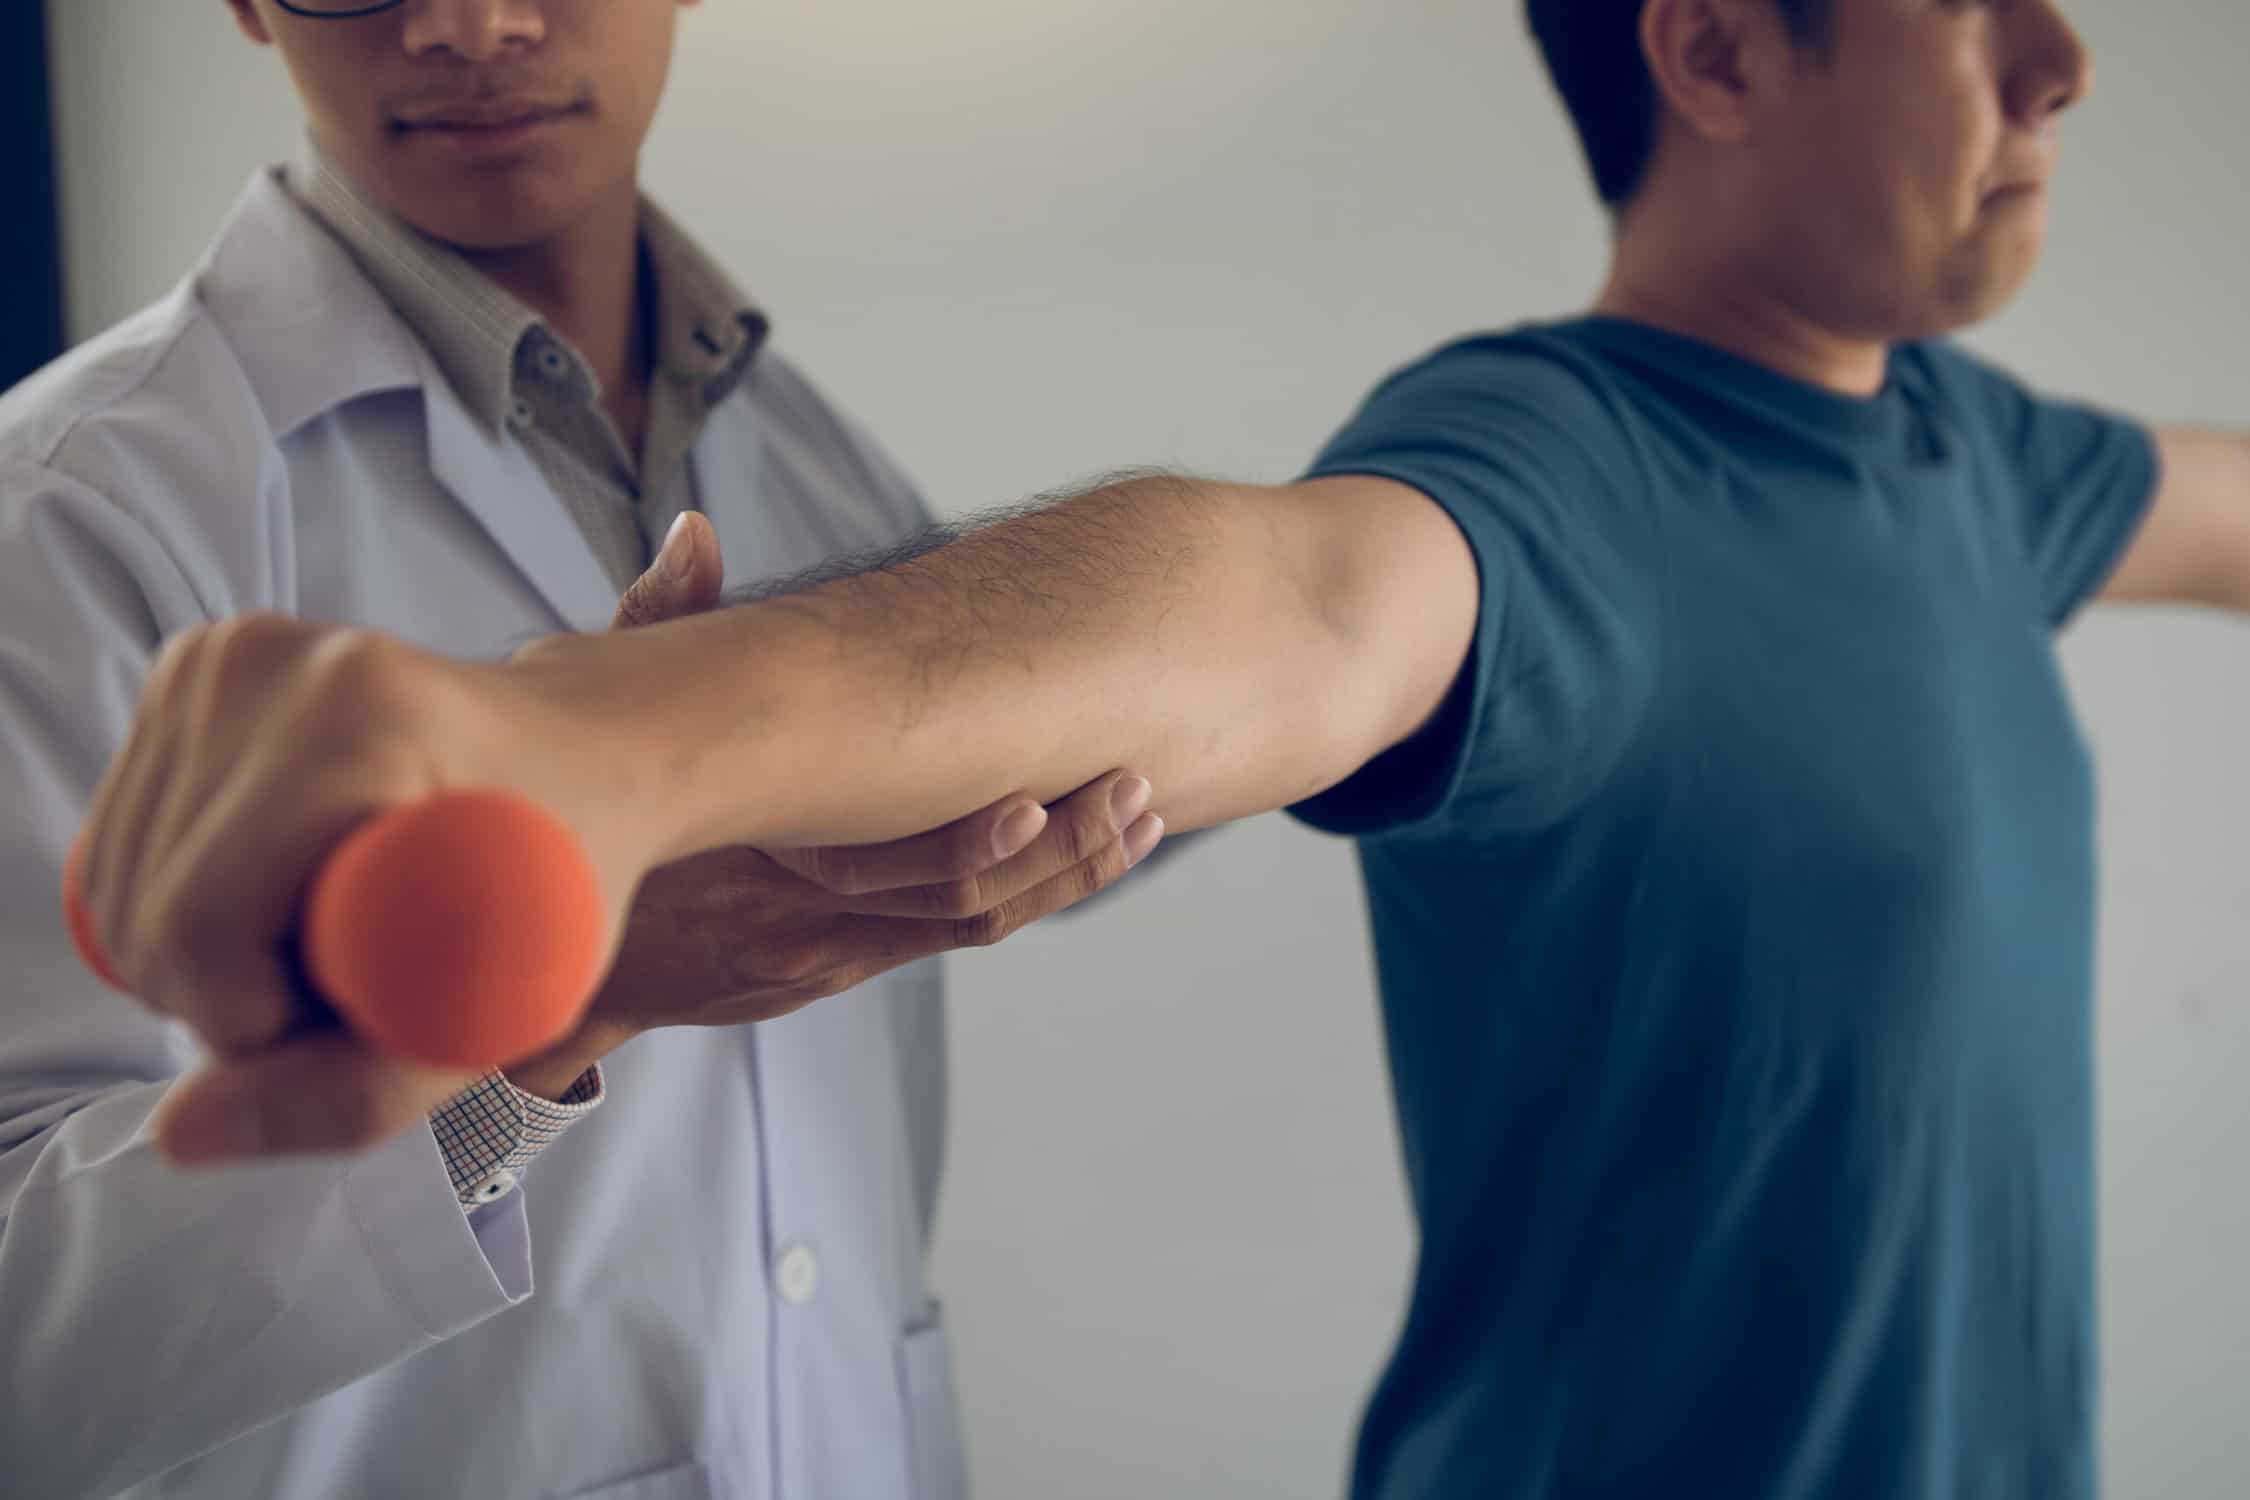 physical therapy as an Alternative To Cortisone Shots